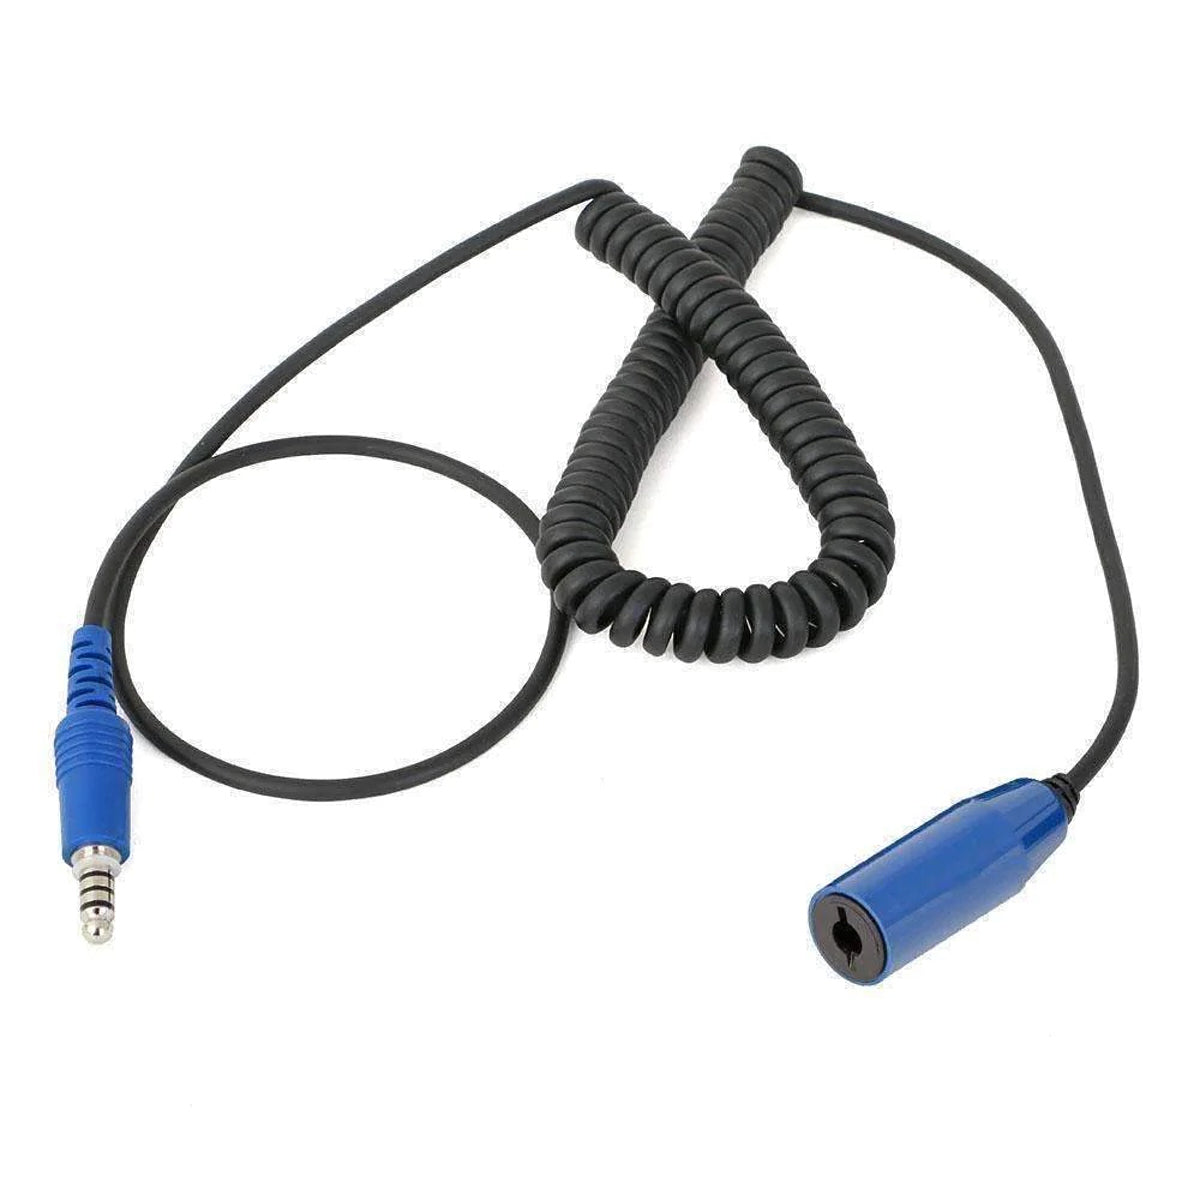 Rugged Radio Products Adaptor Cable Headset / Intercom Offroad RGRCC-OFF-EXT